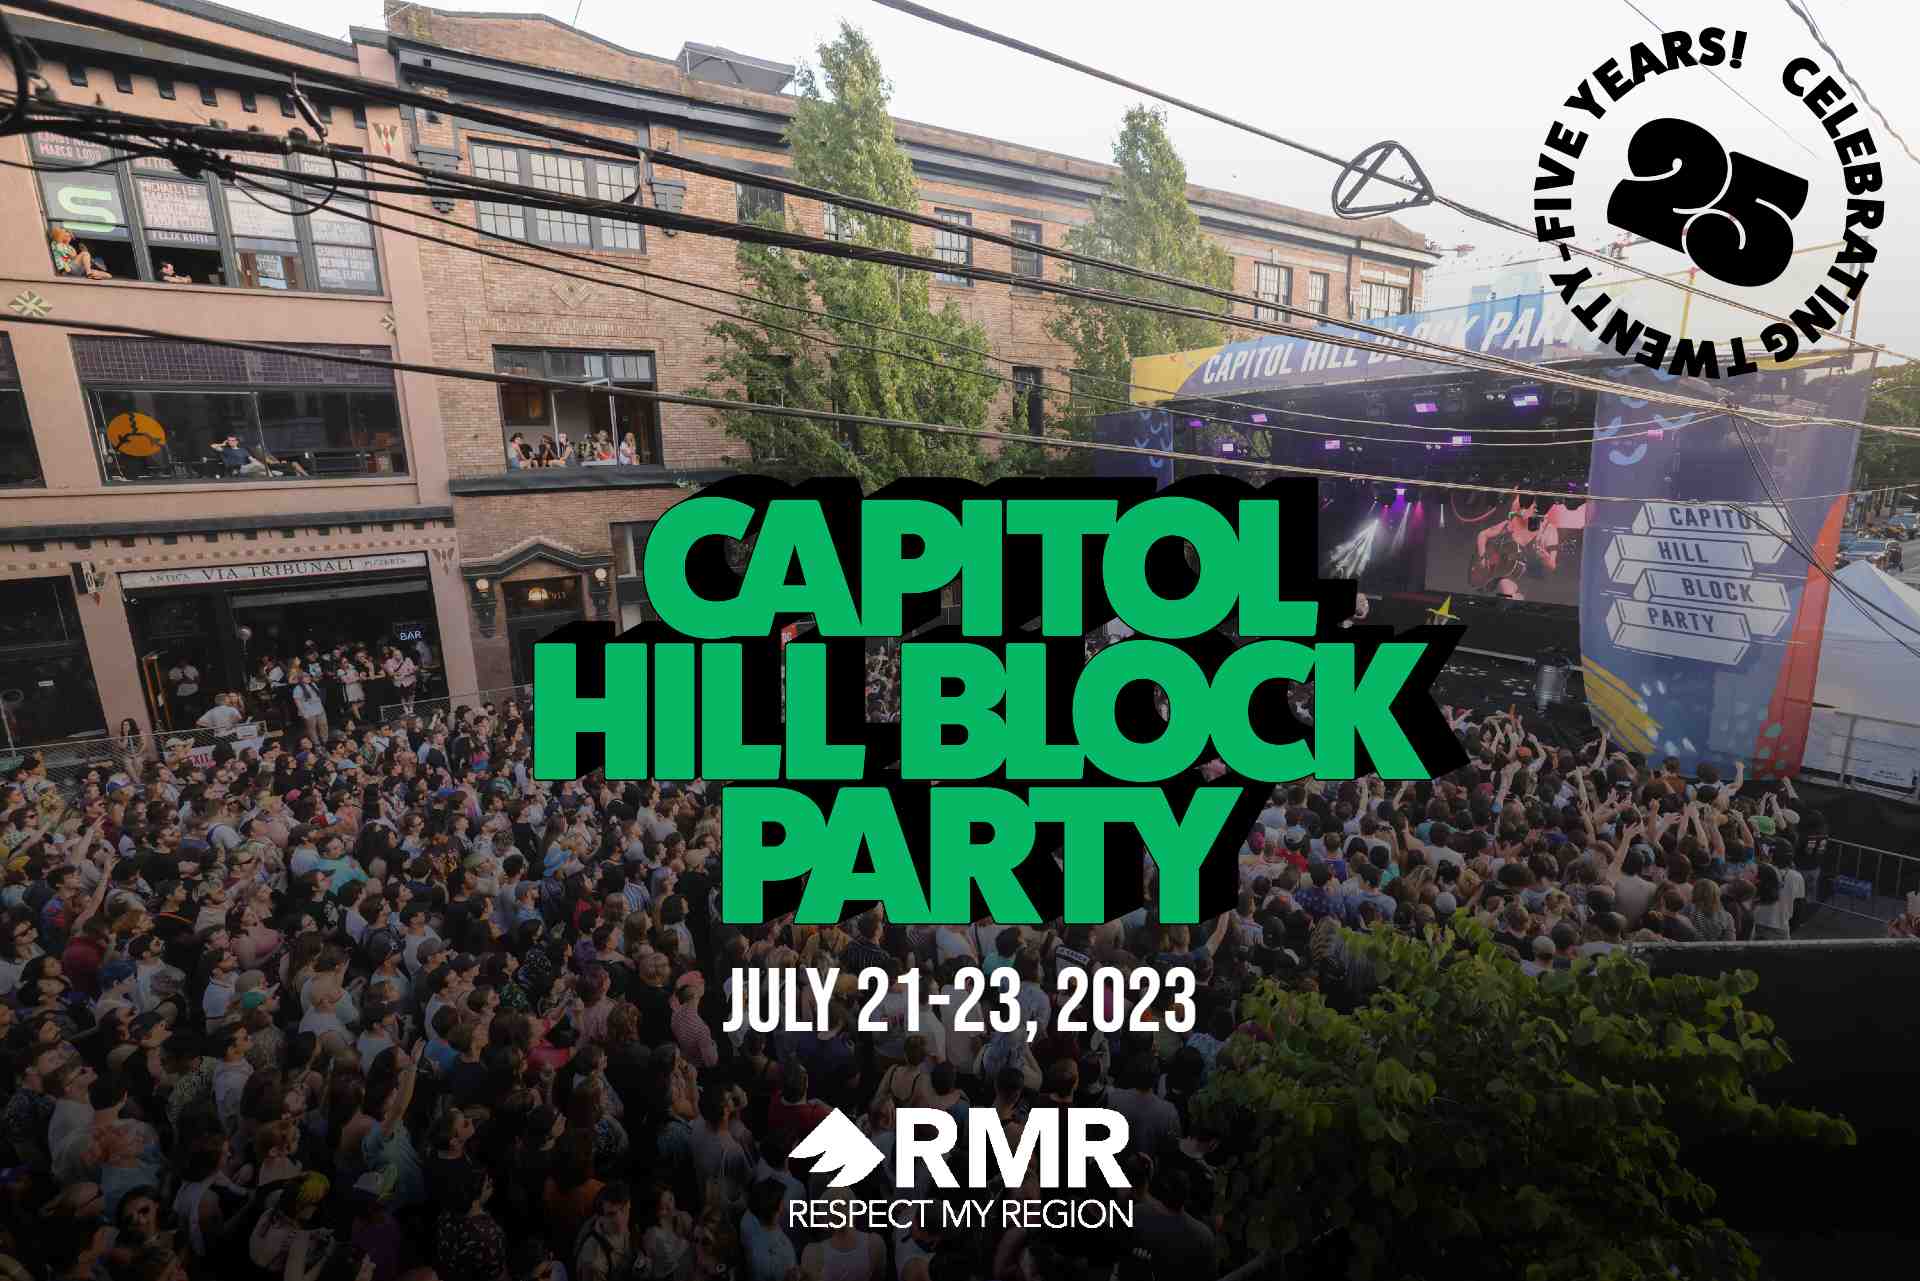 Capitol Hill block Party 25th anniversary